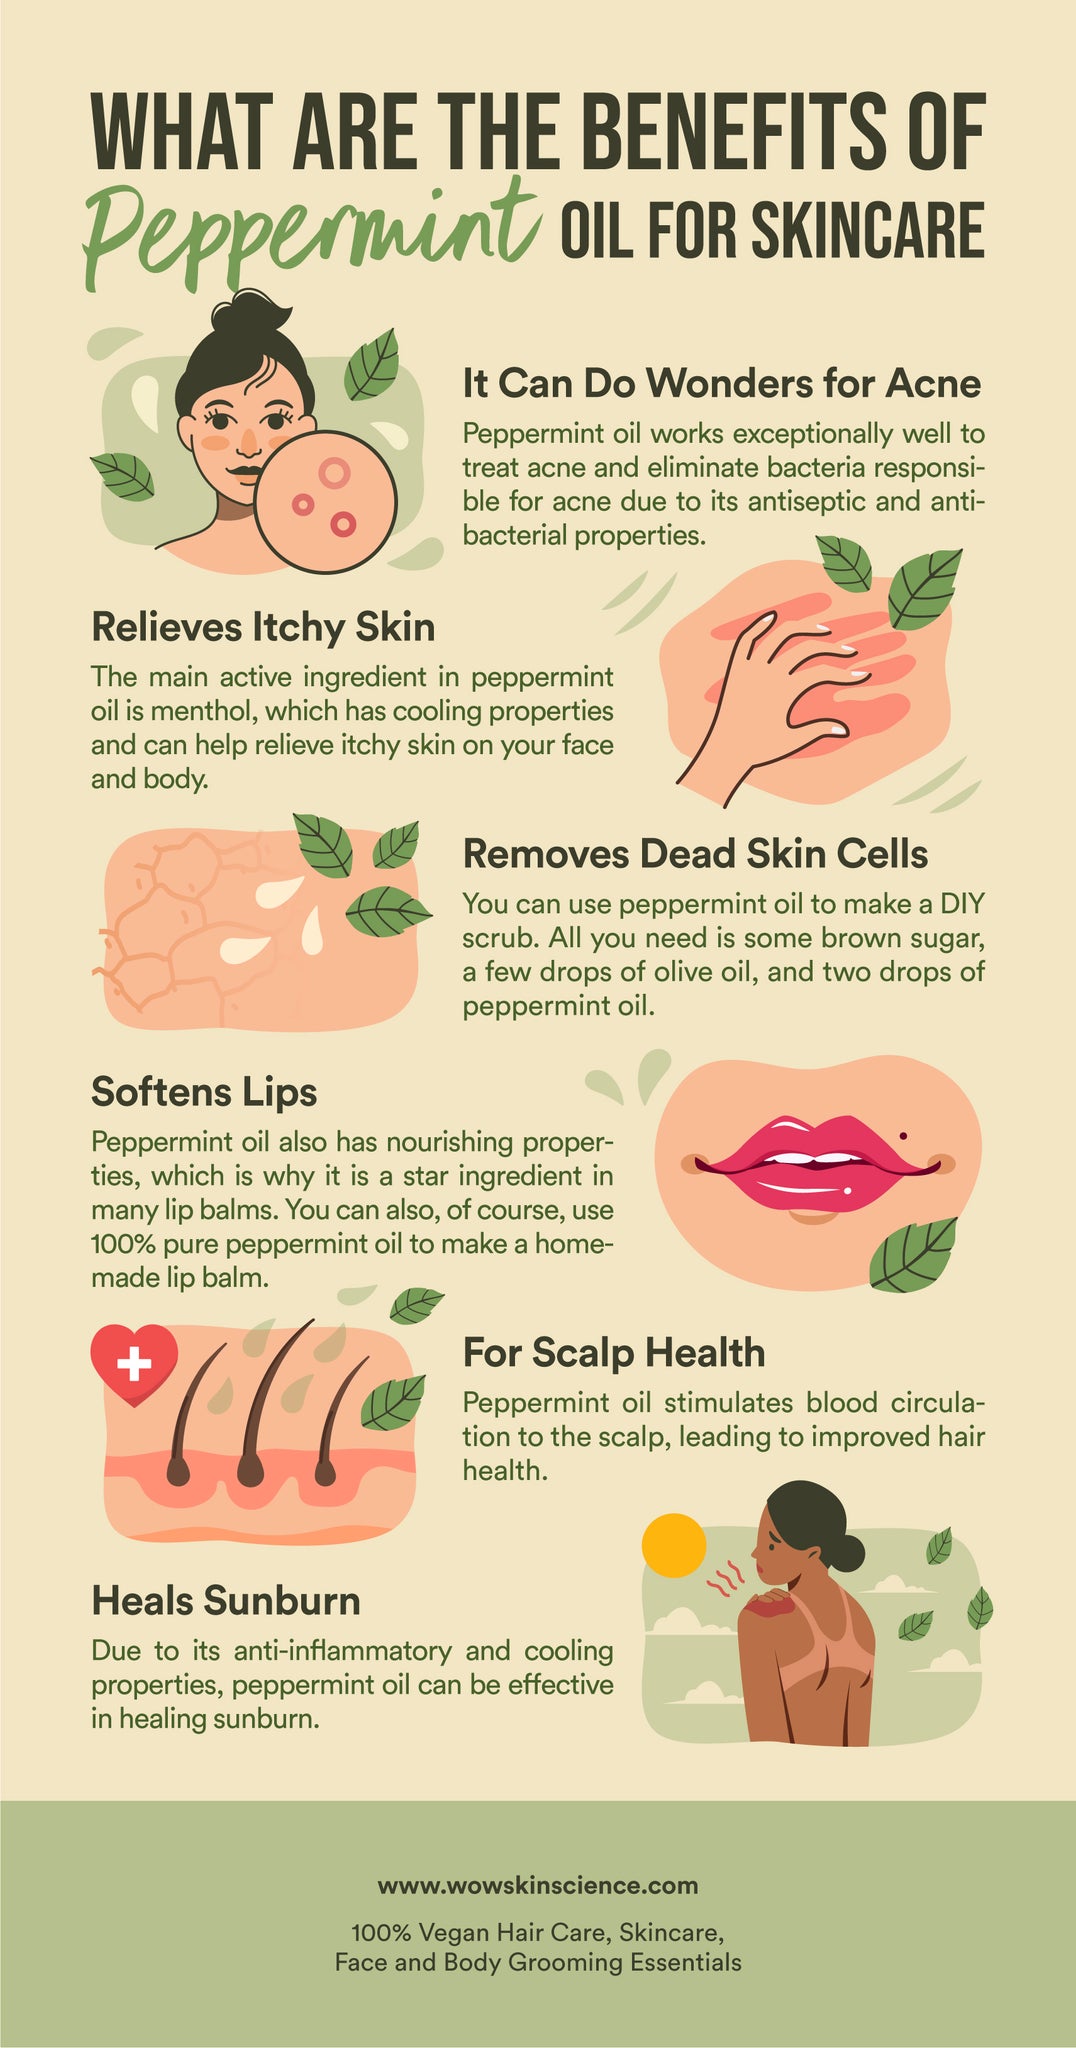 Is Peppermint Oil Good for Skin Care?